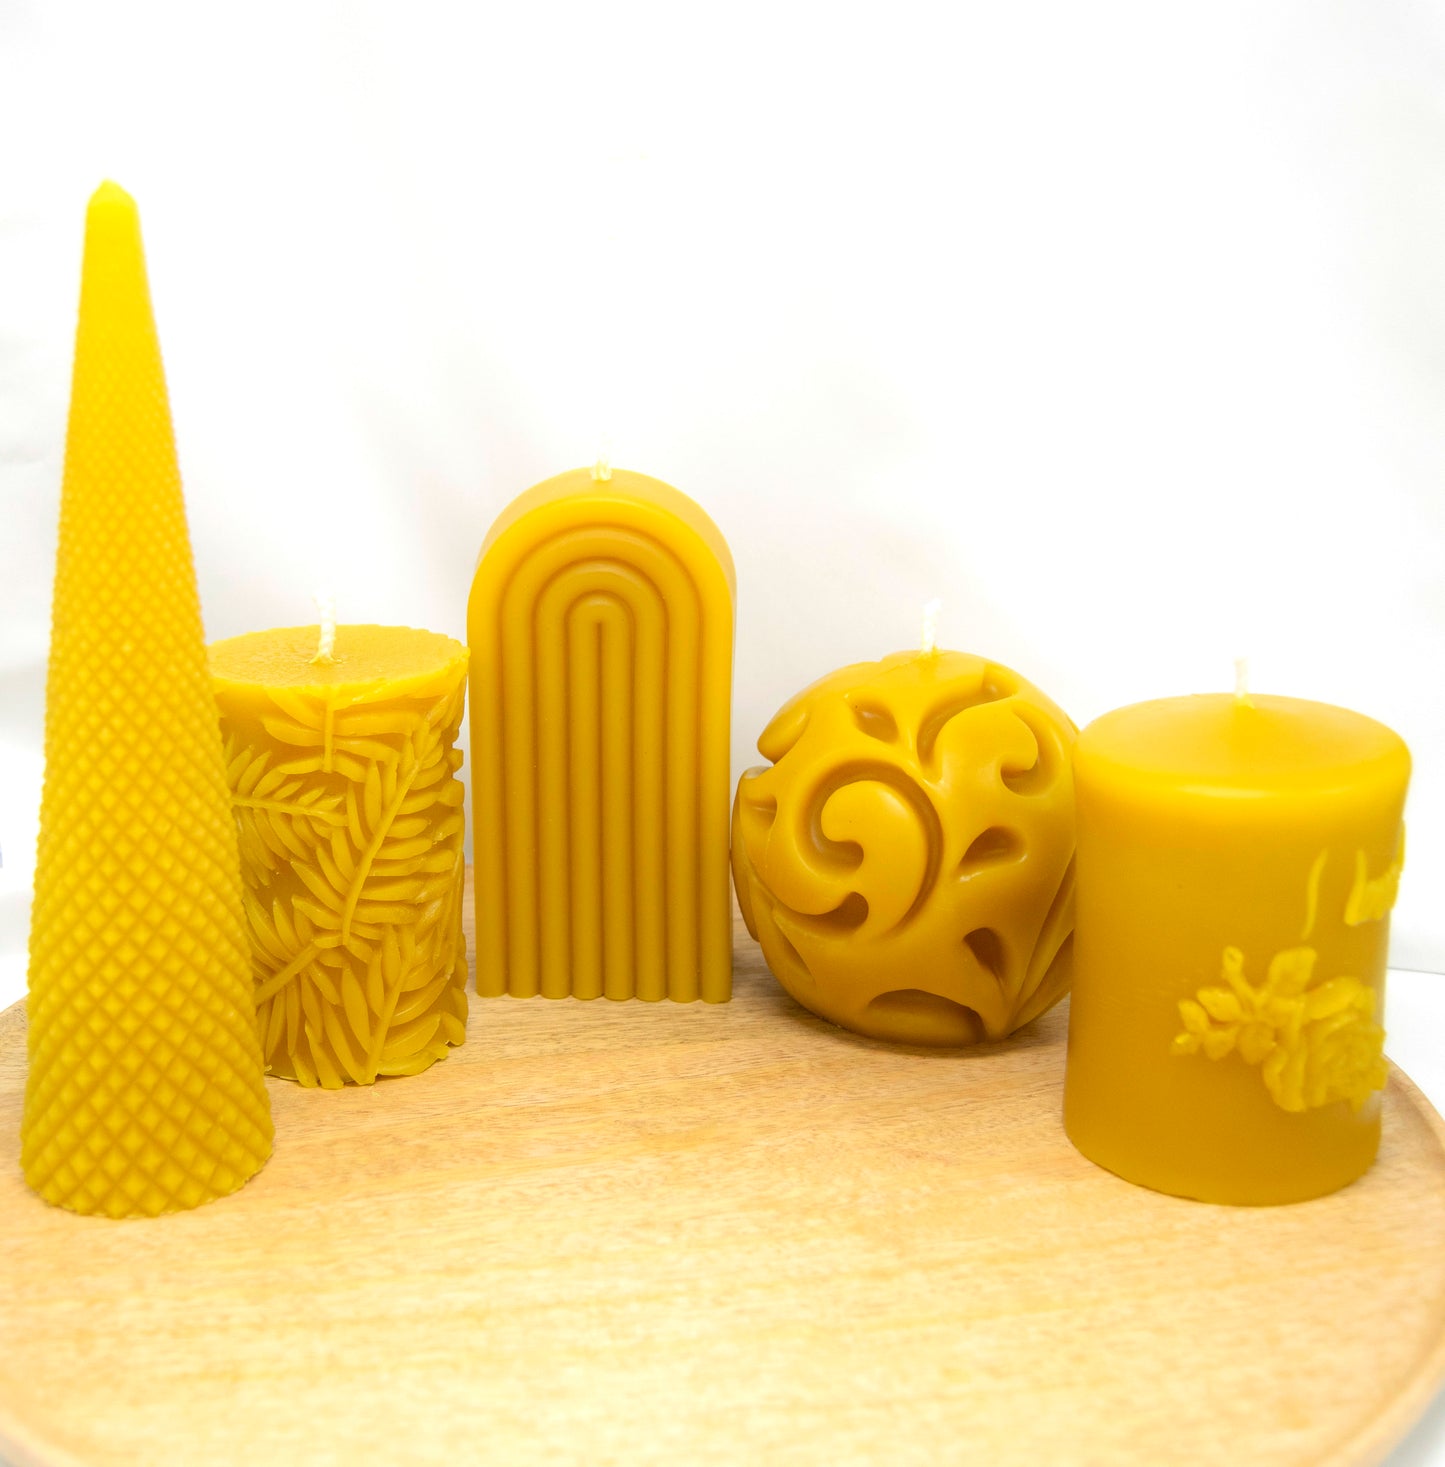 Handmade 3" Sphere Pure Beeswax Pillar Candle - Create a Natural and Serene Atmosphere!"